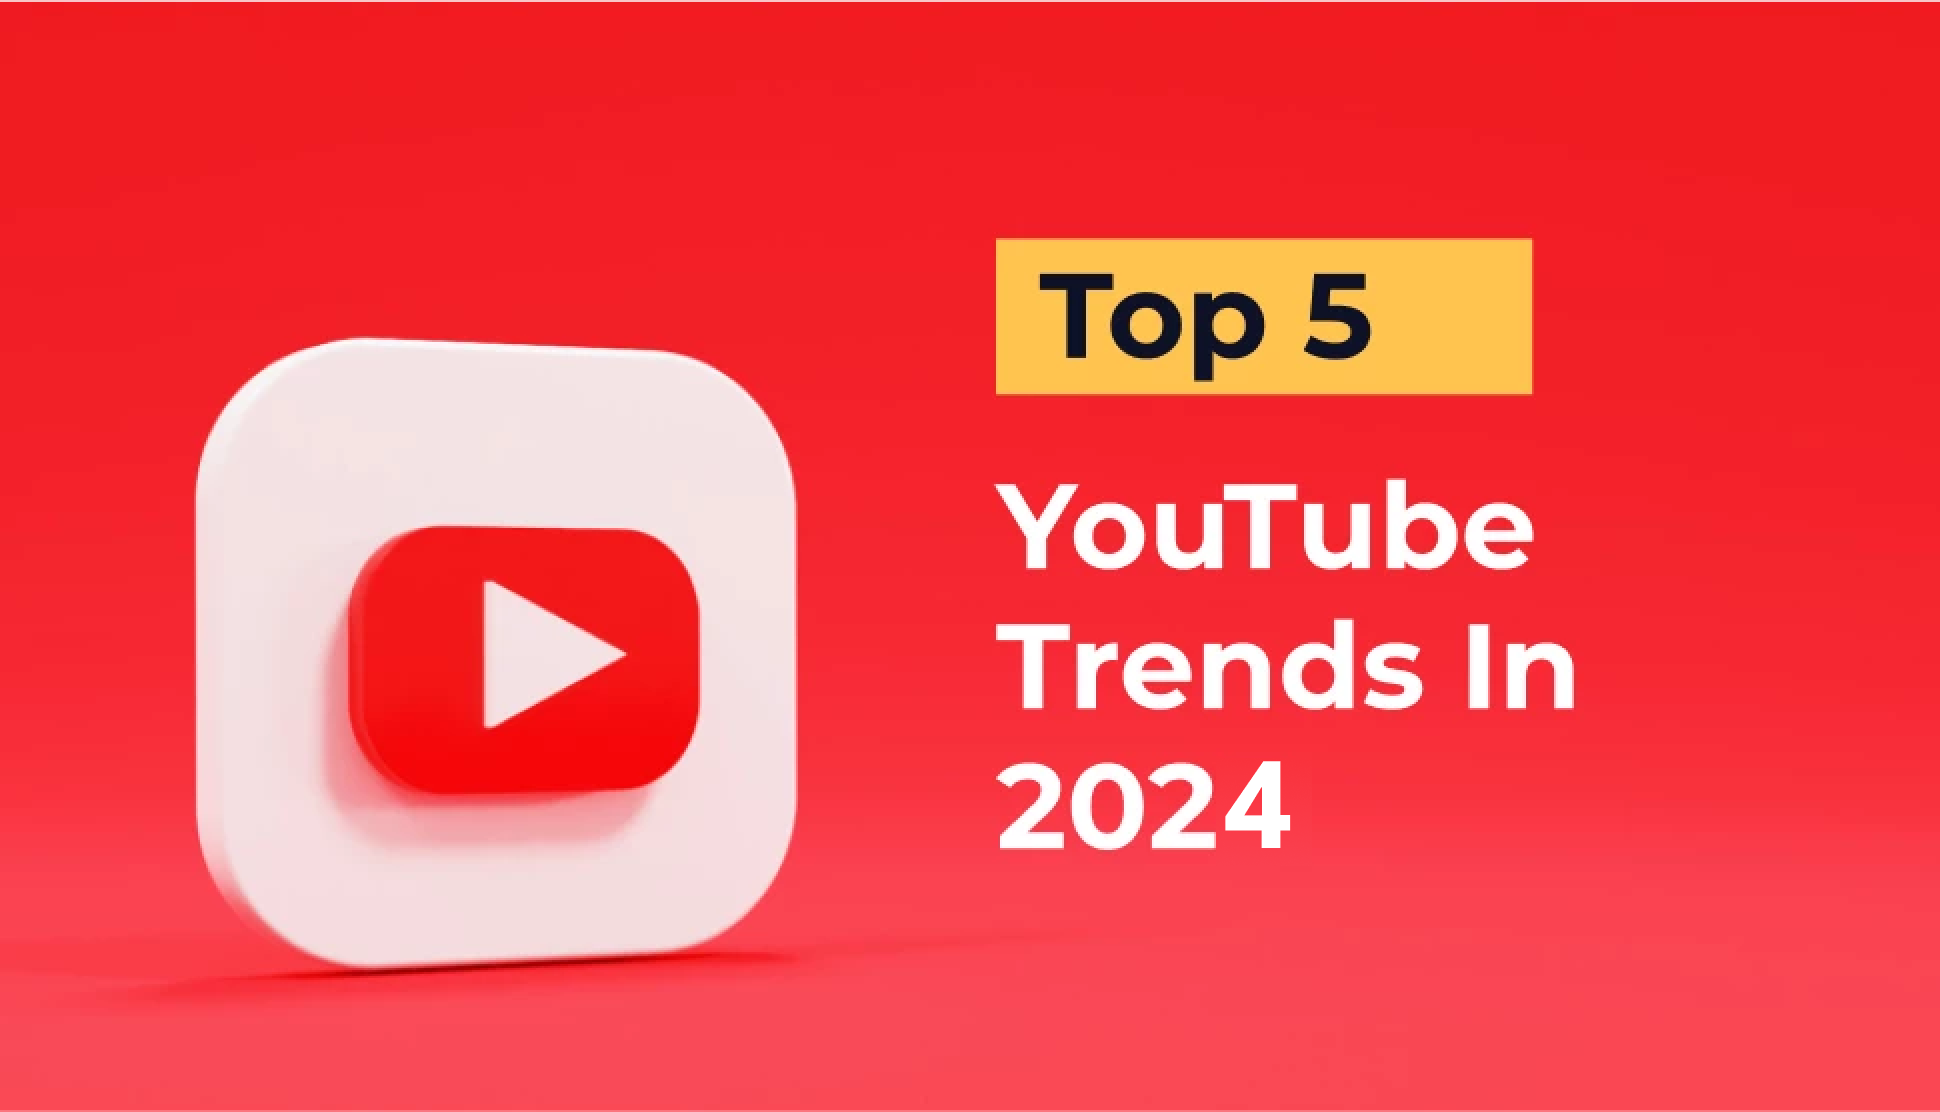 Top 10 YouTube Trends To Expect In 2024